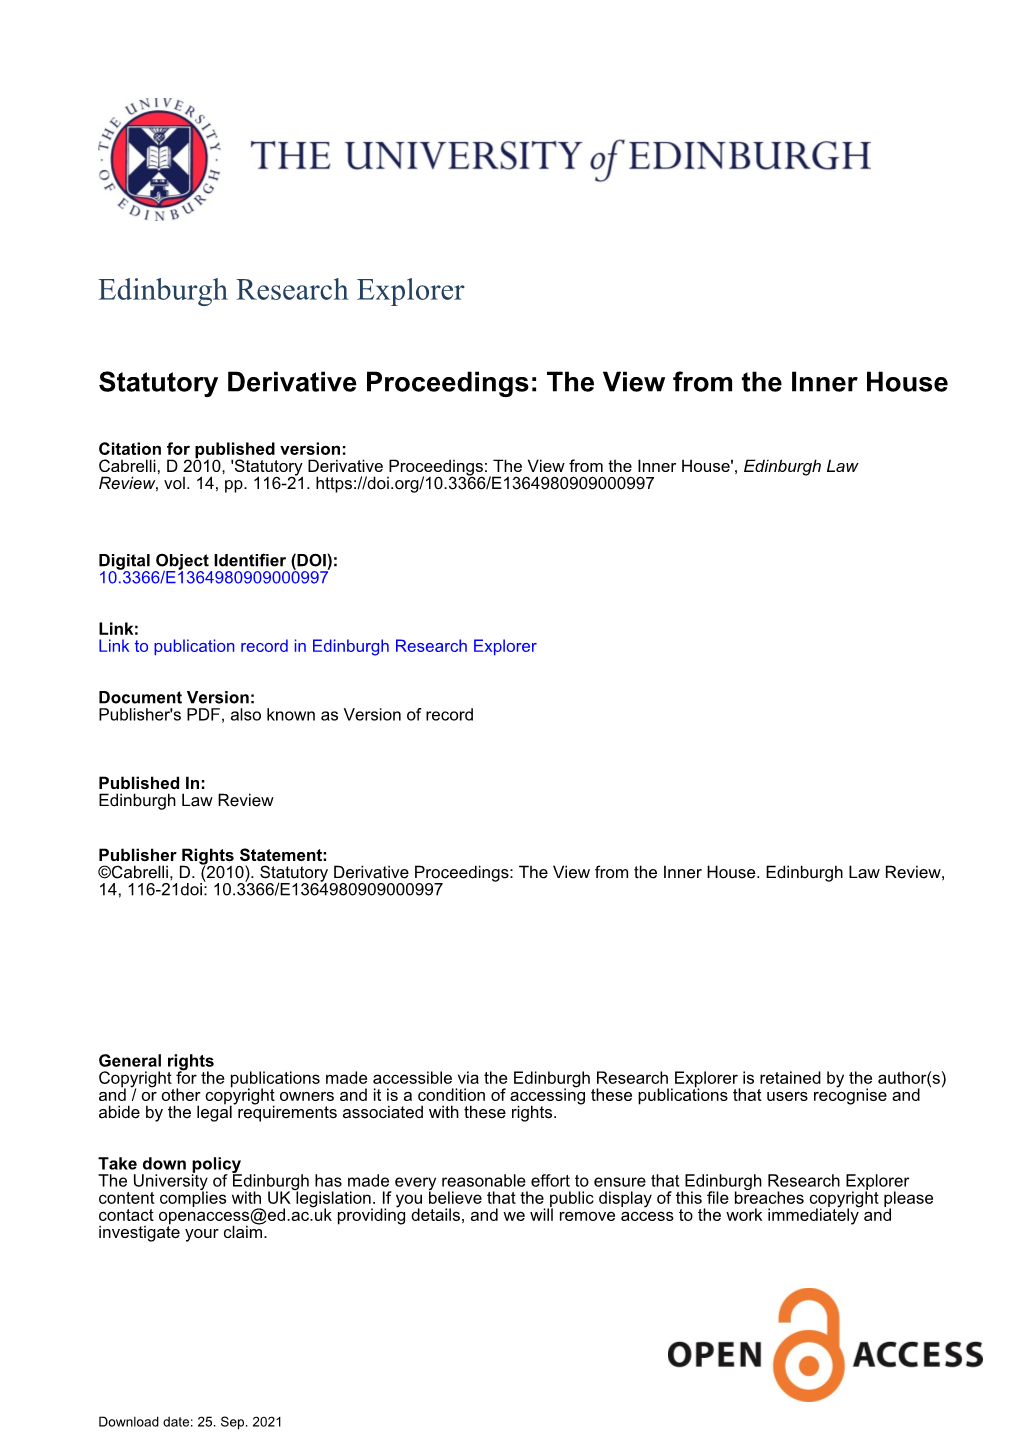 Statutory Derivative Proceedings: the View from the Inner House